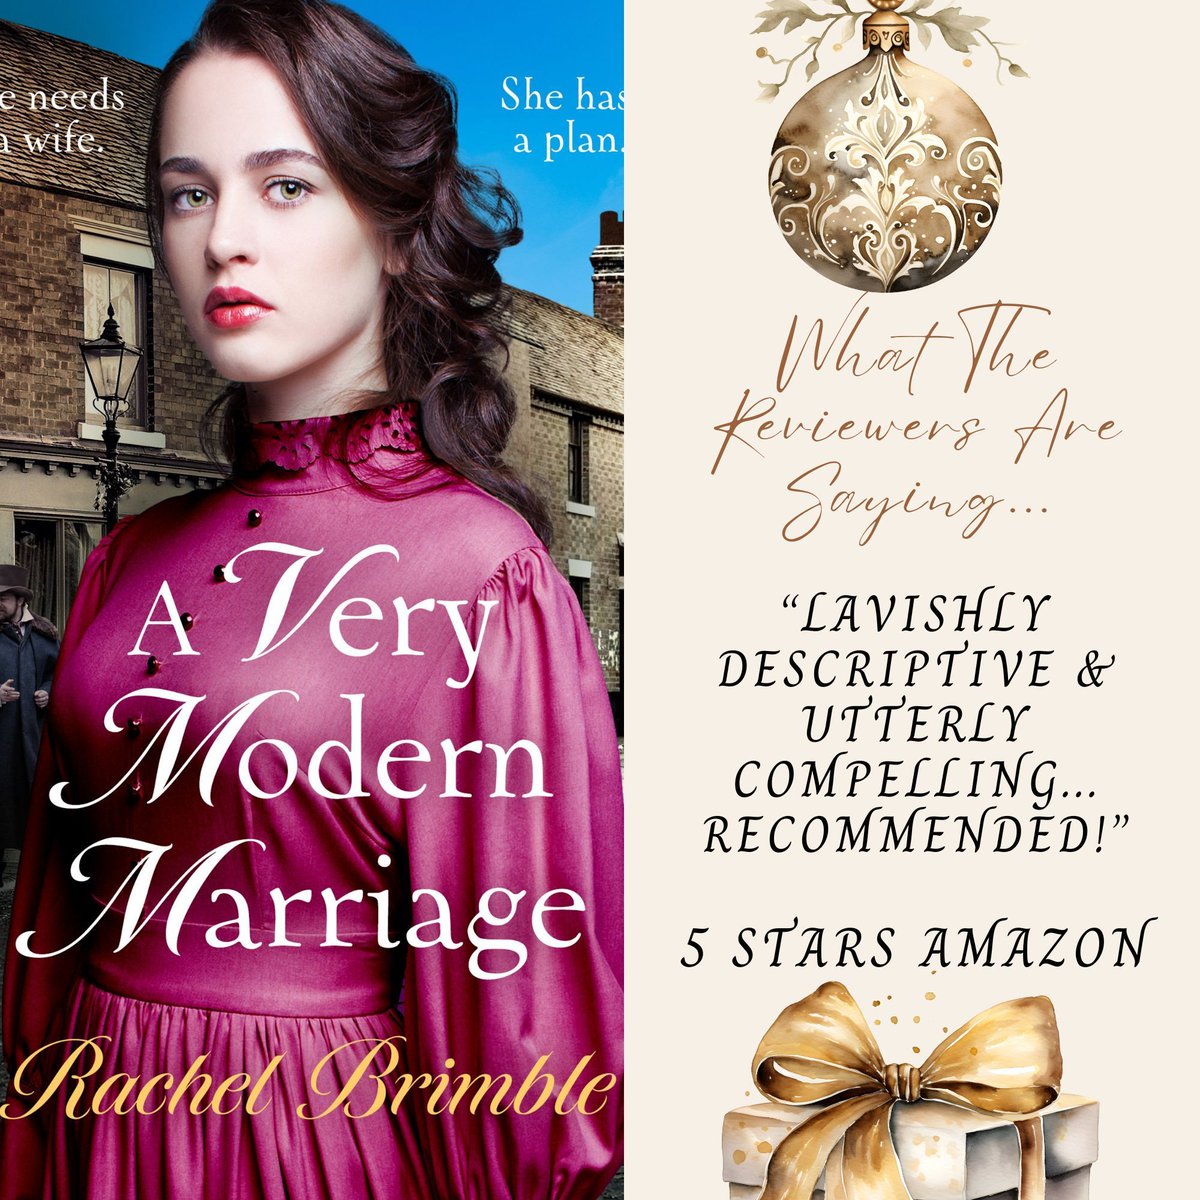 A VERY MODERN MARRIAGE...
#historicalromance #histfic #historicalreads #historicalebooks
BUY: buff.ly/3Ebcv2Y